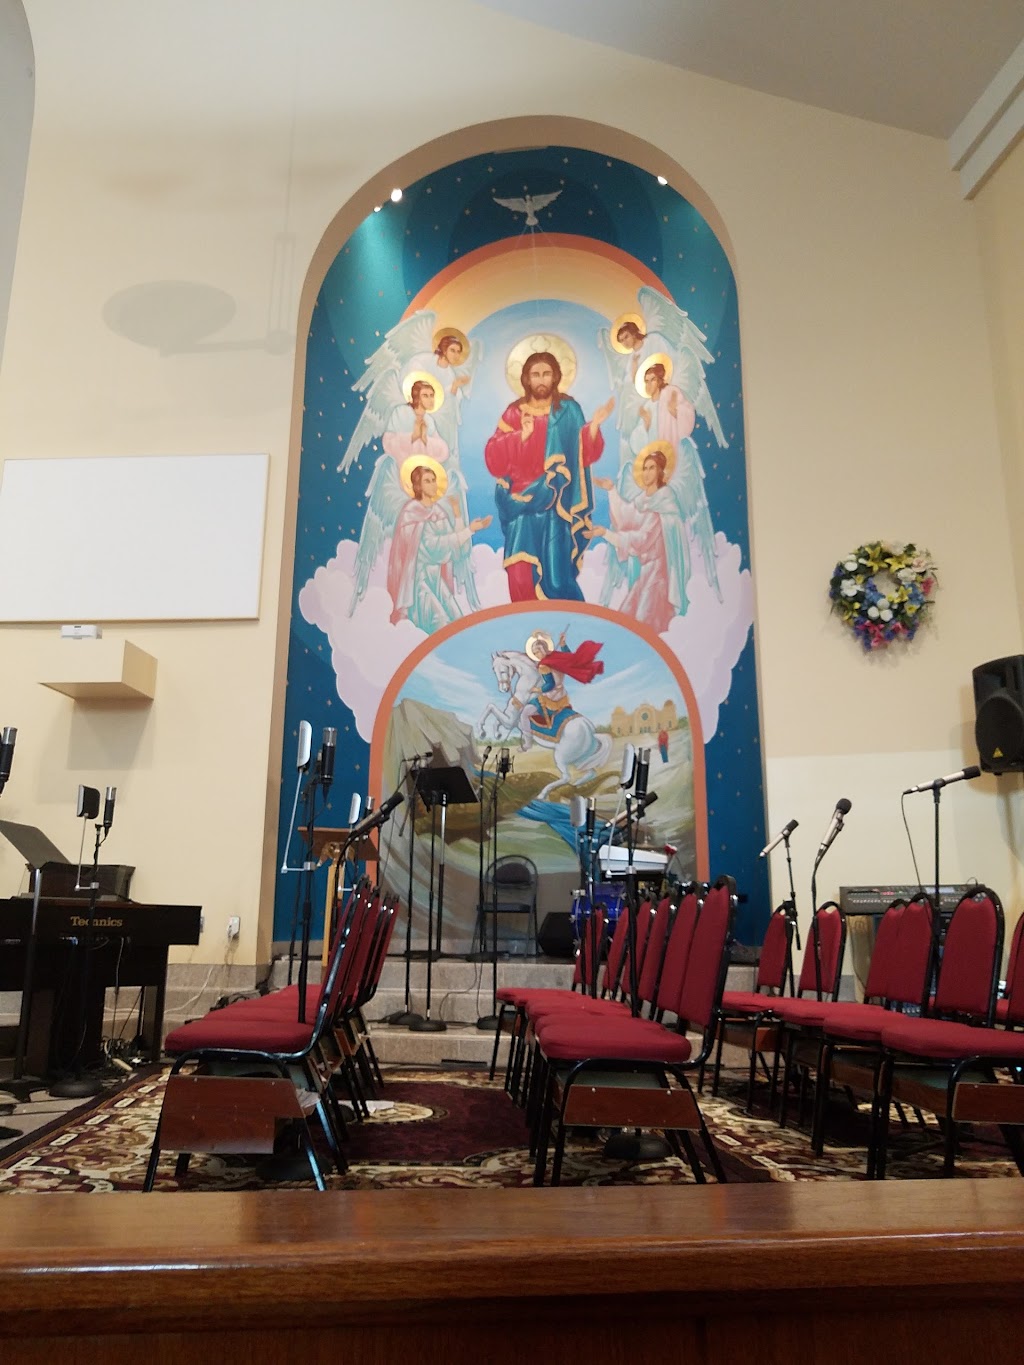 St. George Chaldean Catholic Church | 45700 Dequindre Rd, Shelby Township, MI 48317, USA | Phone: (586) 254-7221